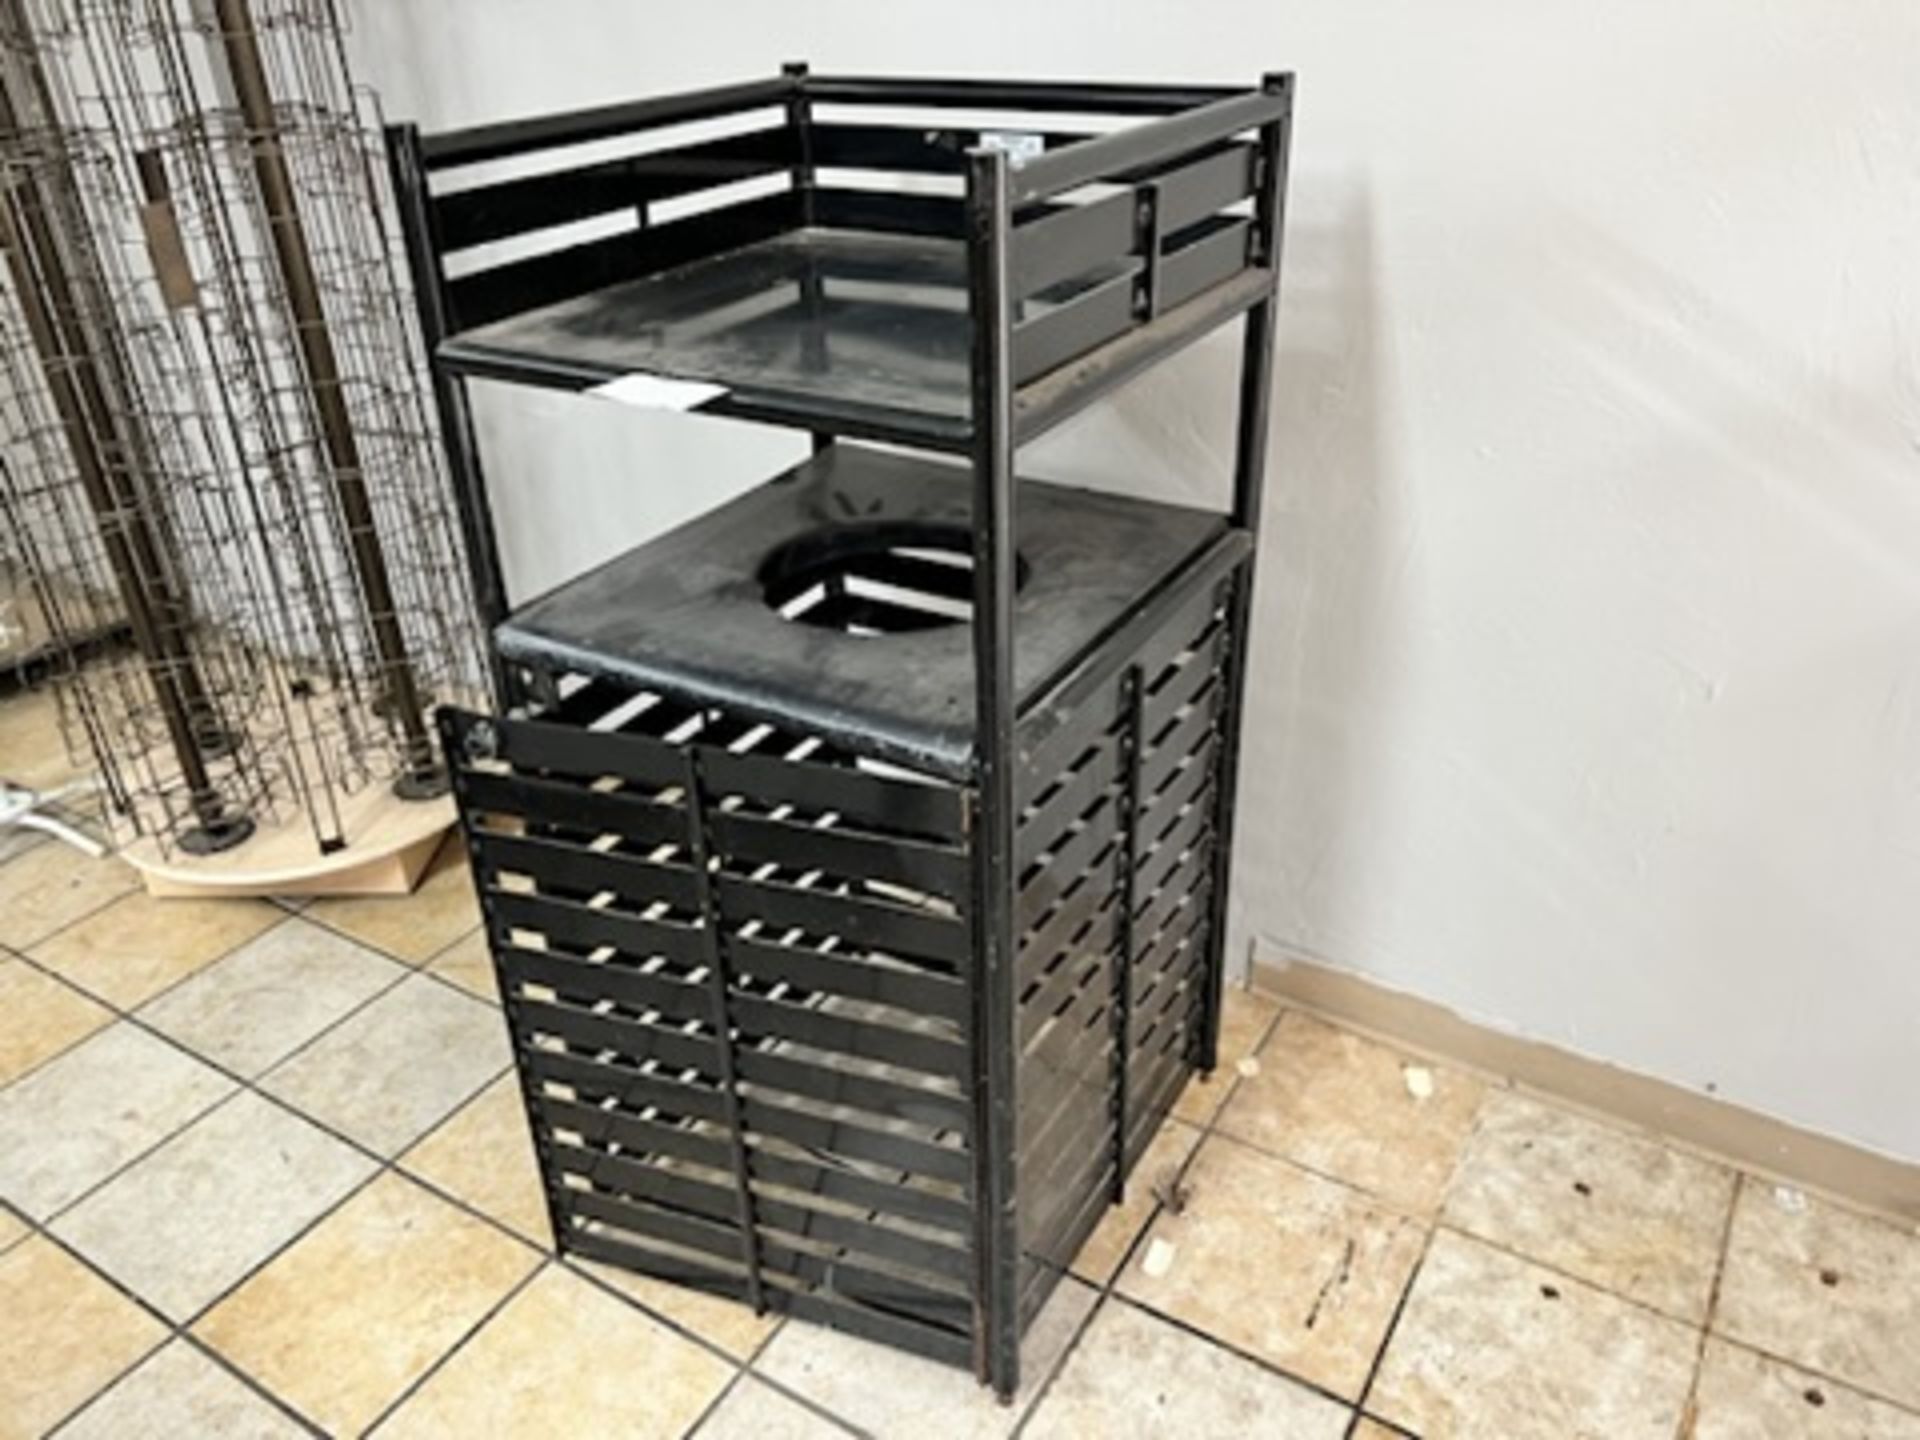 Garbage enclosure with upper tray shelf, 51” Tall X 24” Wide X 24.5” Deep